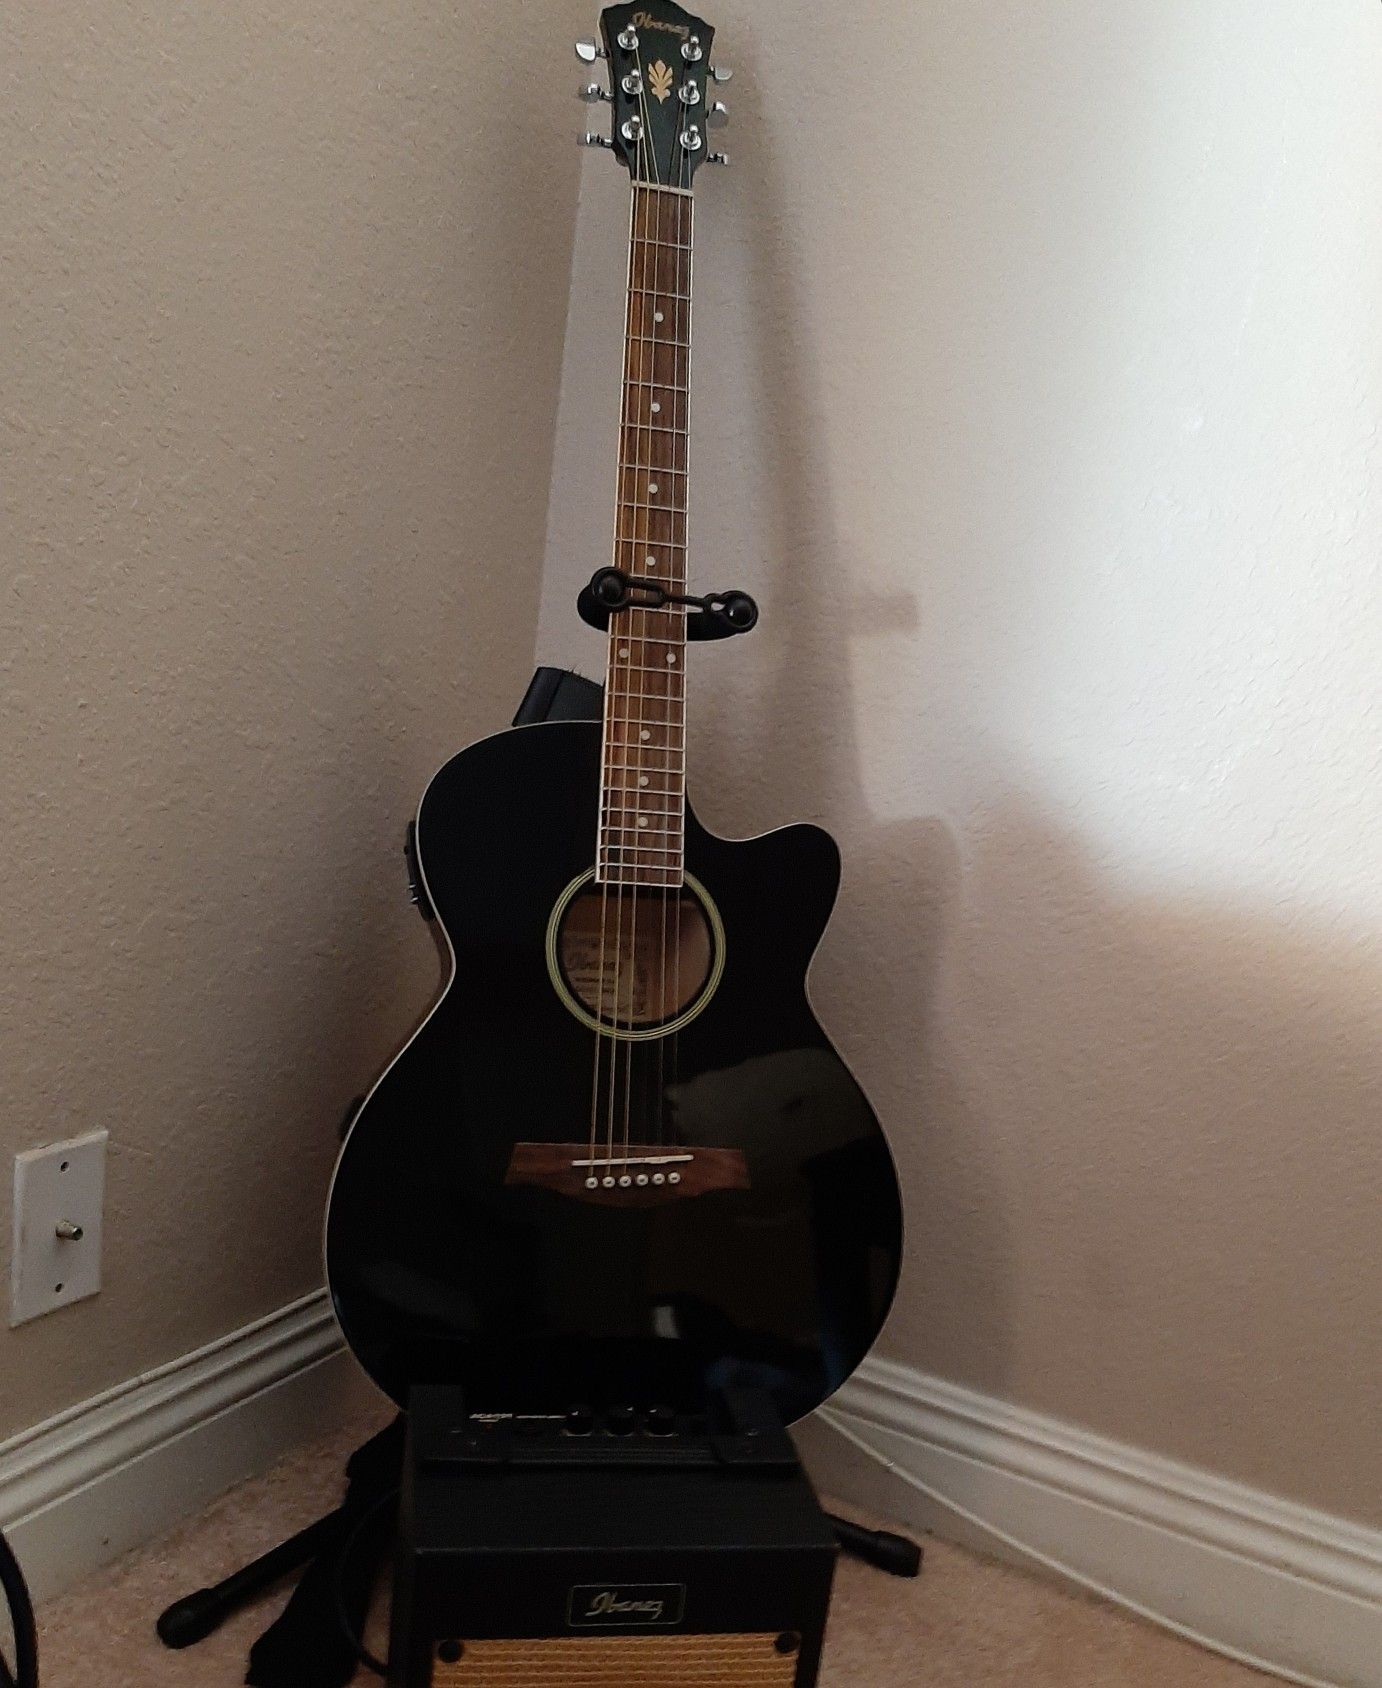 Ibanez guitar acoustic-electric w/amp, stand, case, humidifier